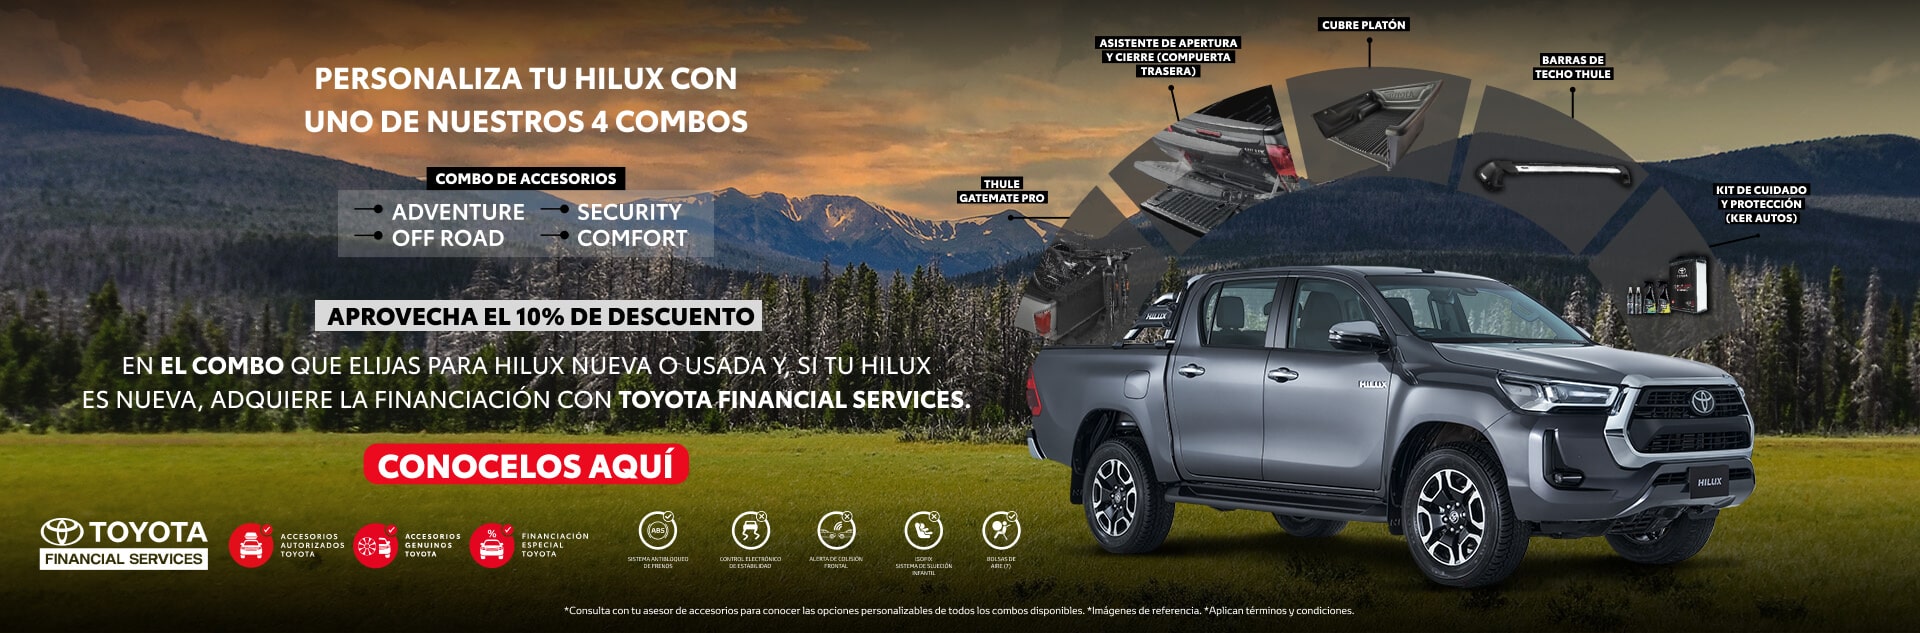 TOYOTA banner-hilux-home